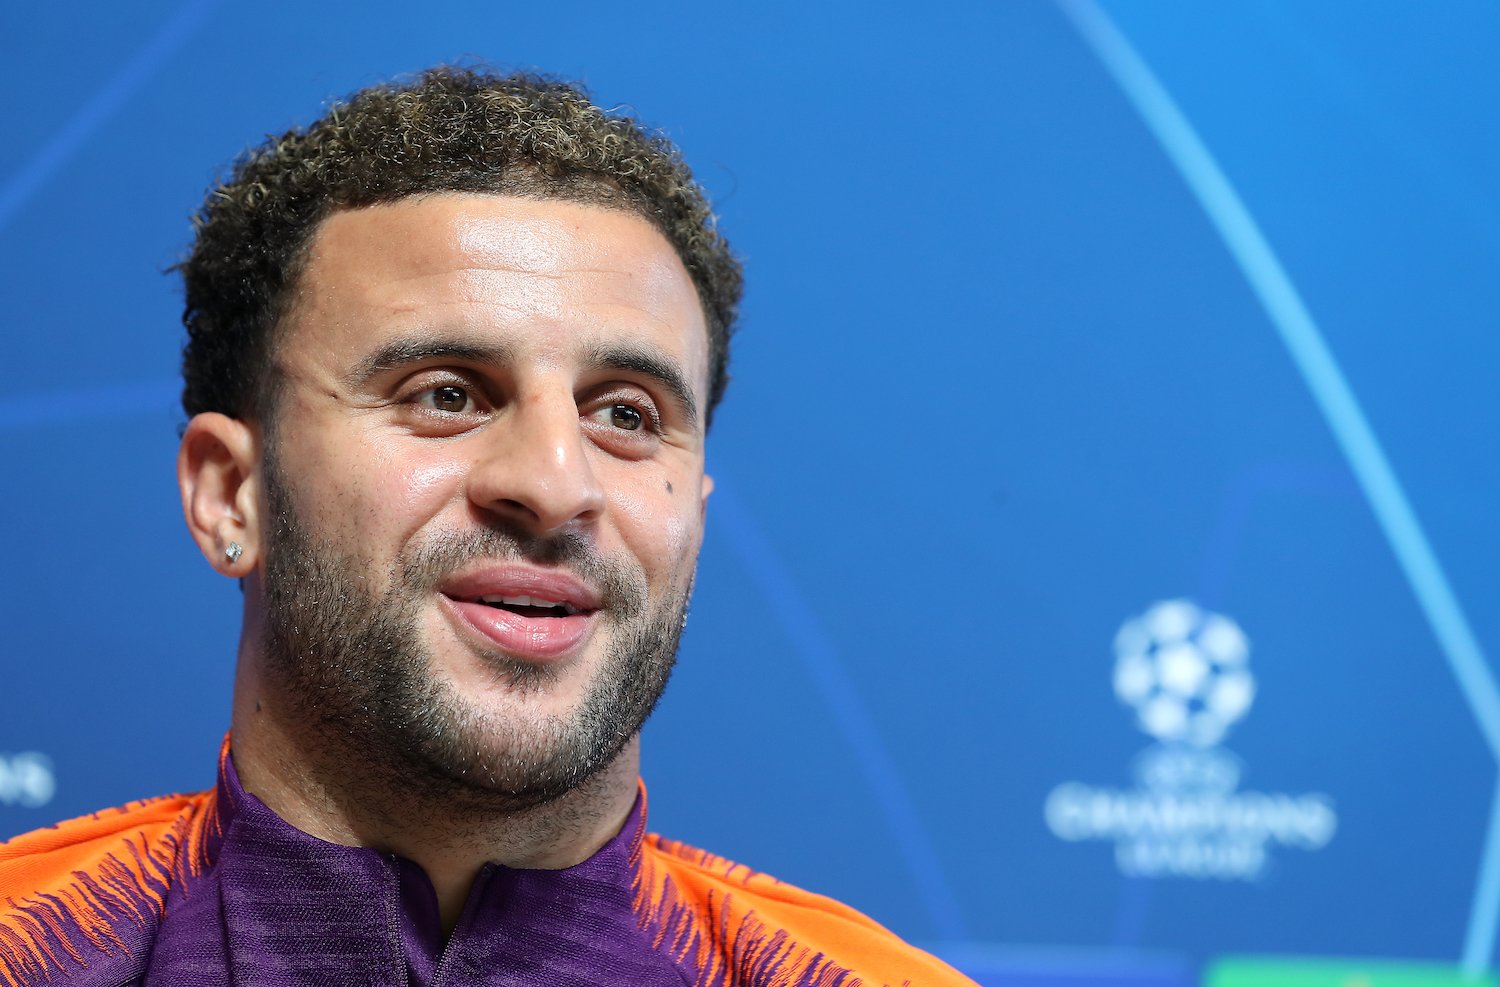 Hopefully we can make our dreams come true and win Champions League, proclaims Kyle Walker